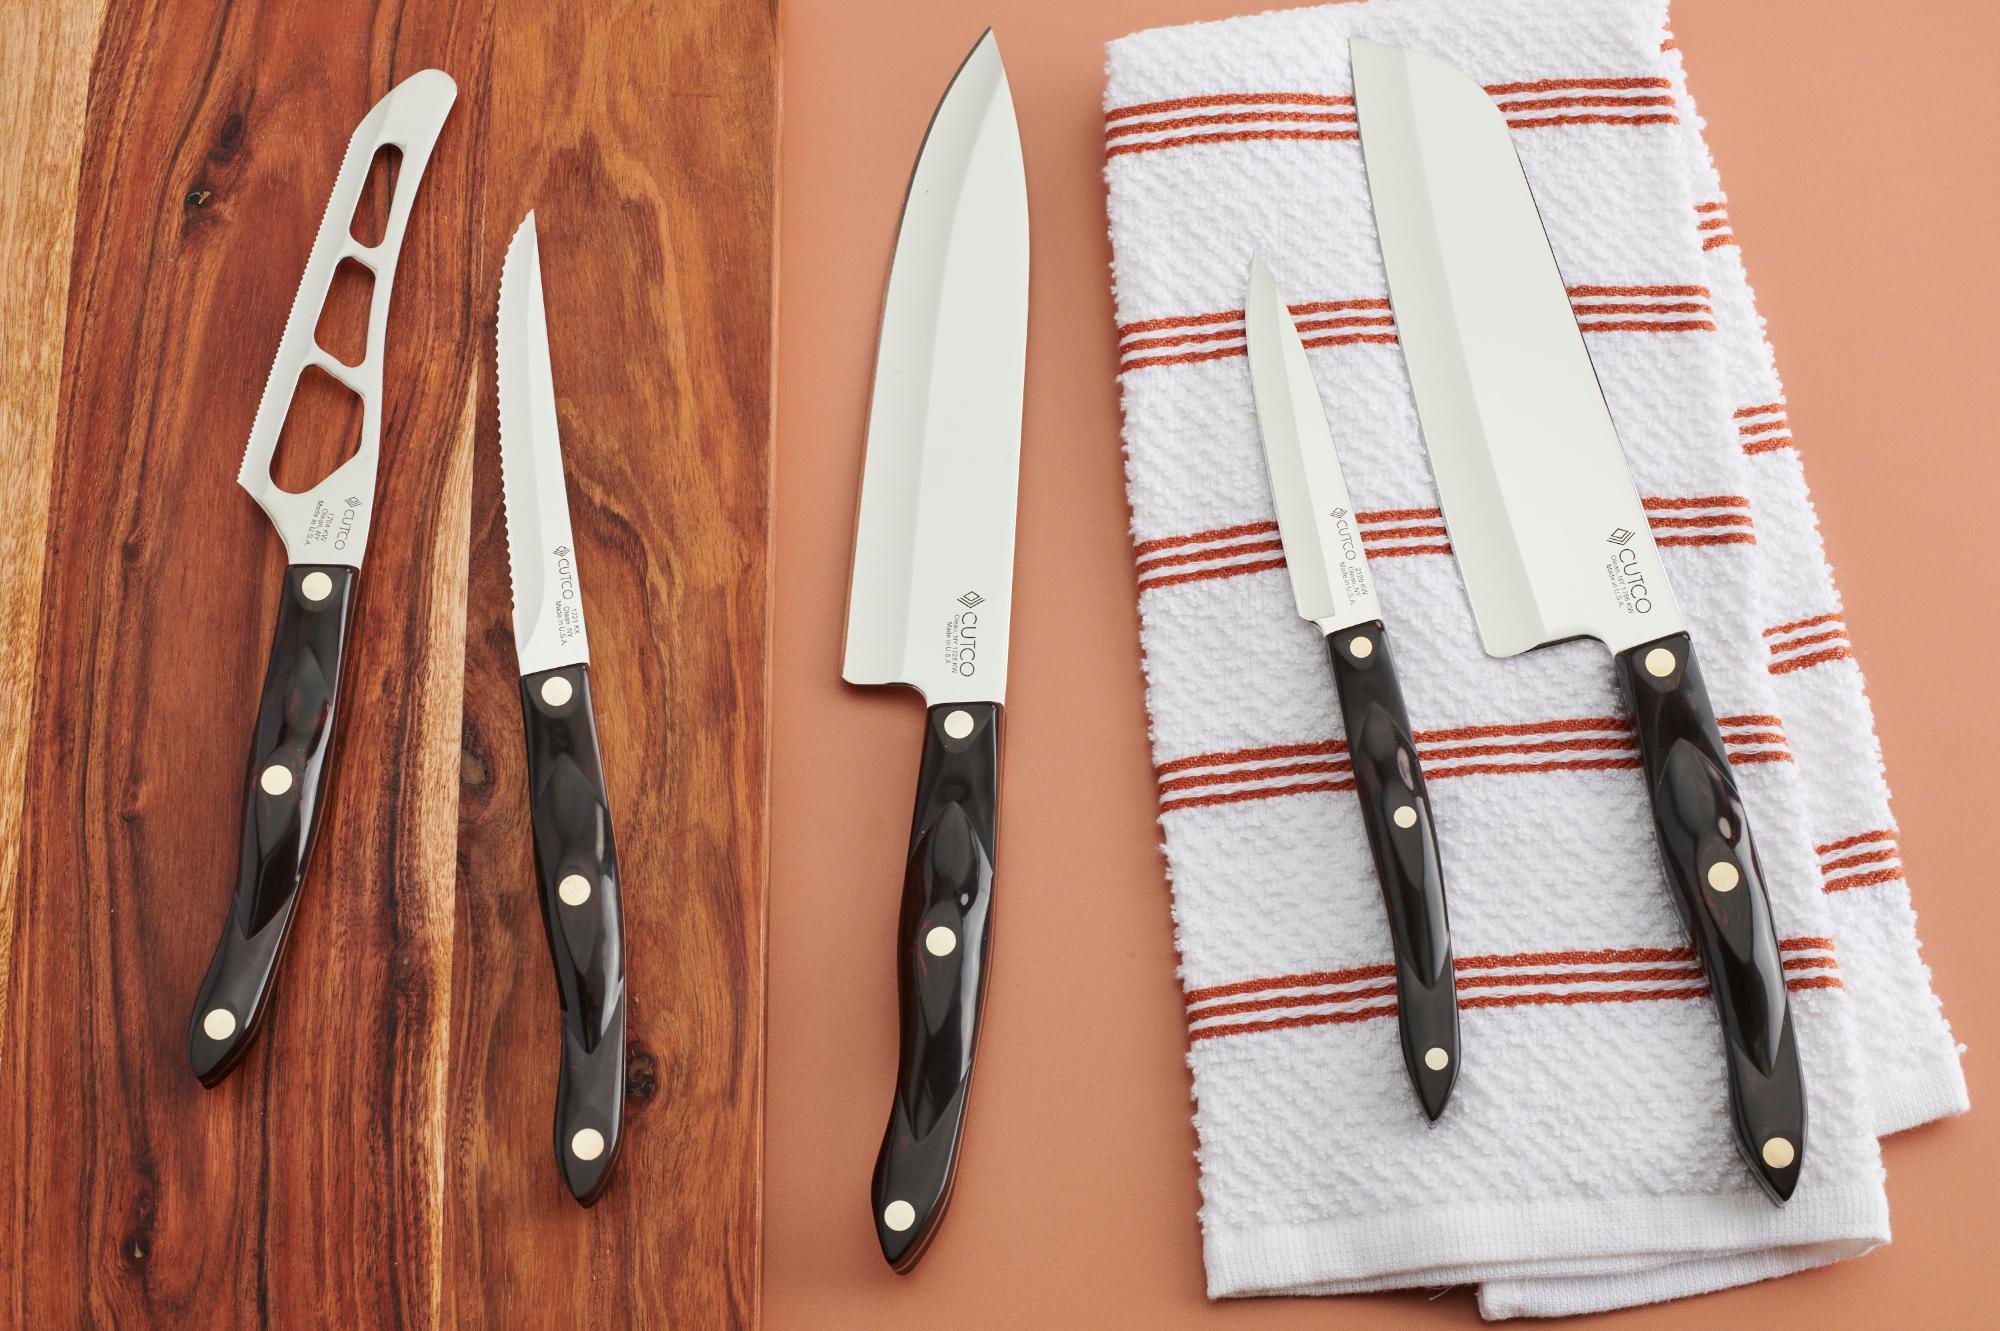 French Chef Knife  Free Sharpening Forever by Cutco